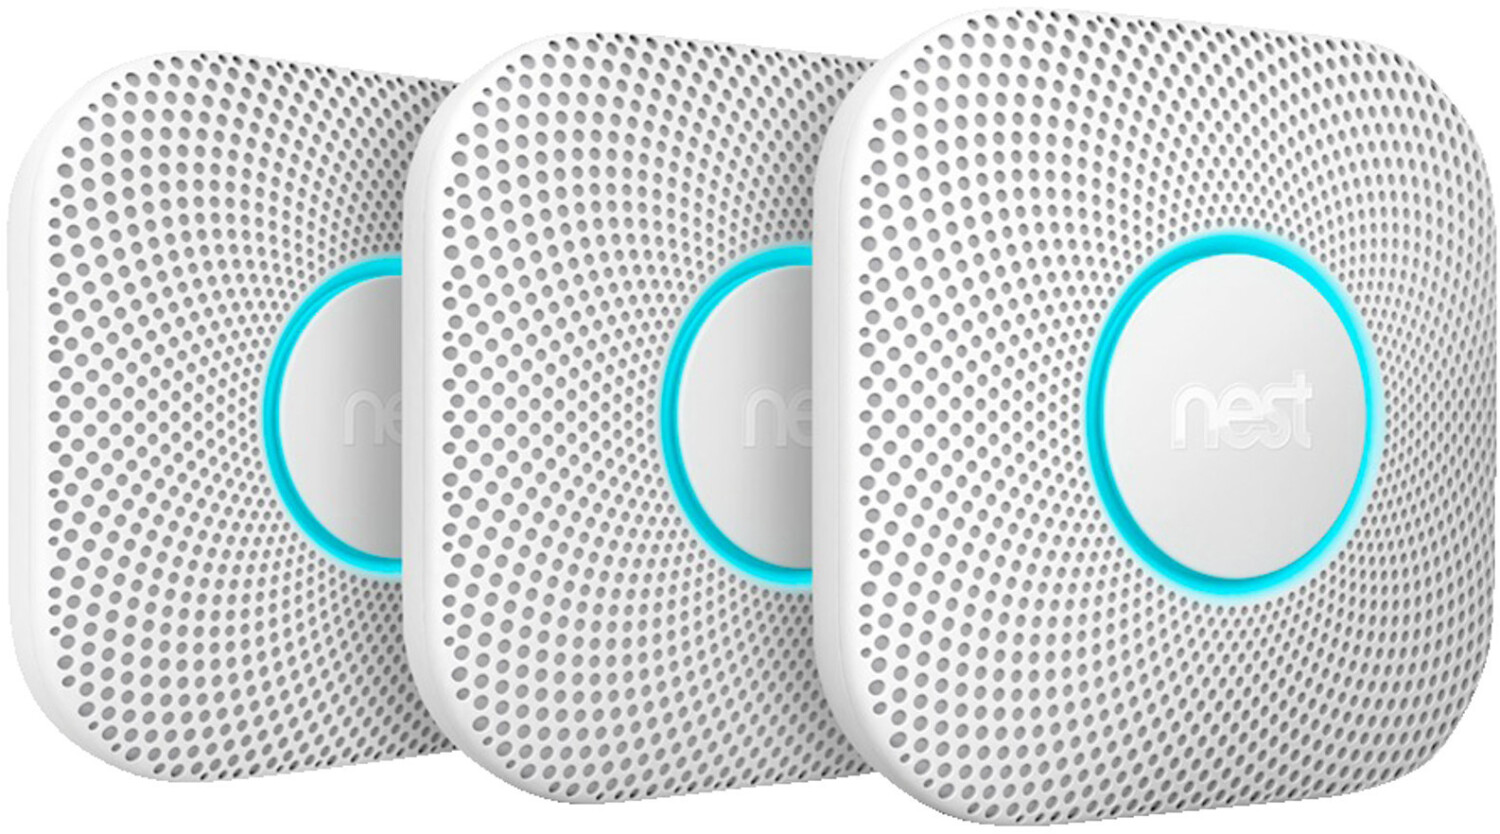 Nest Protect 2nd Generation (S3006BWDE)